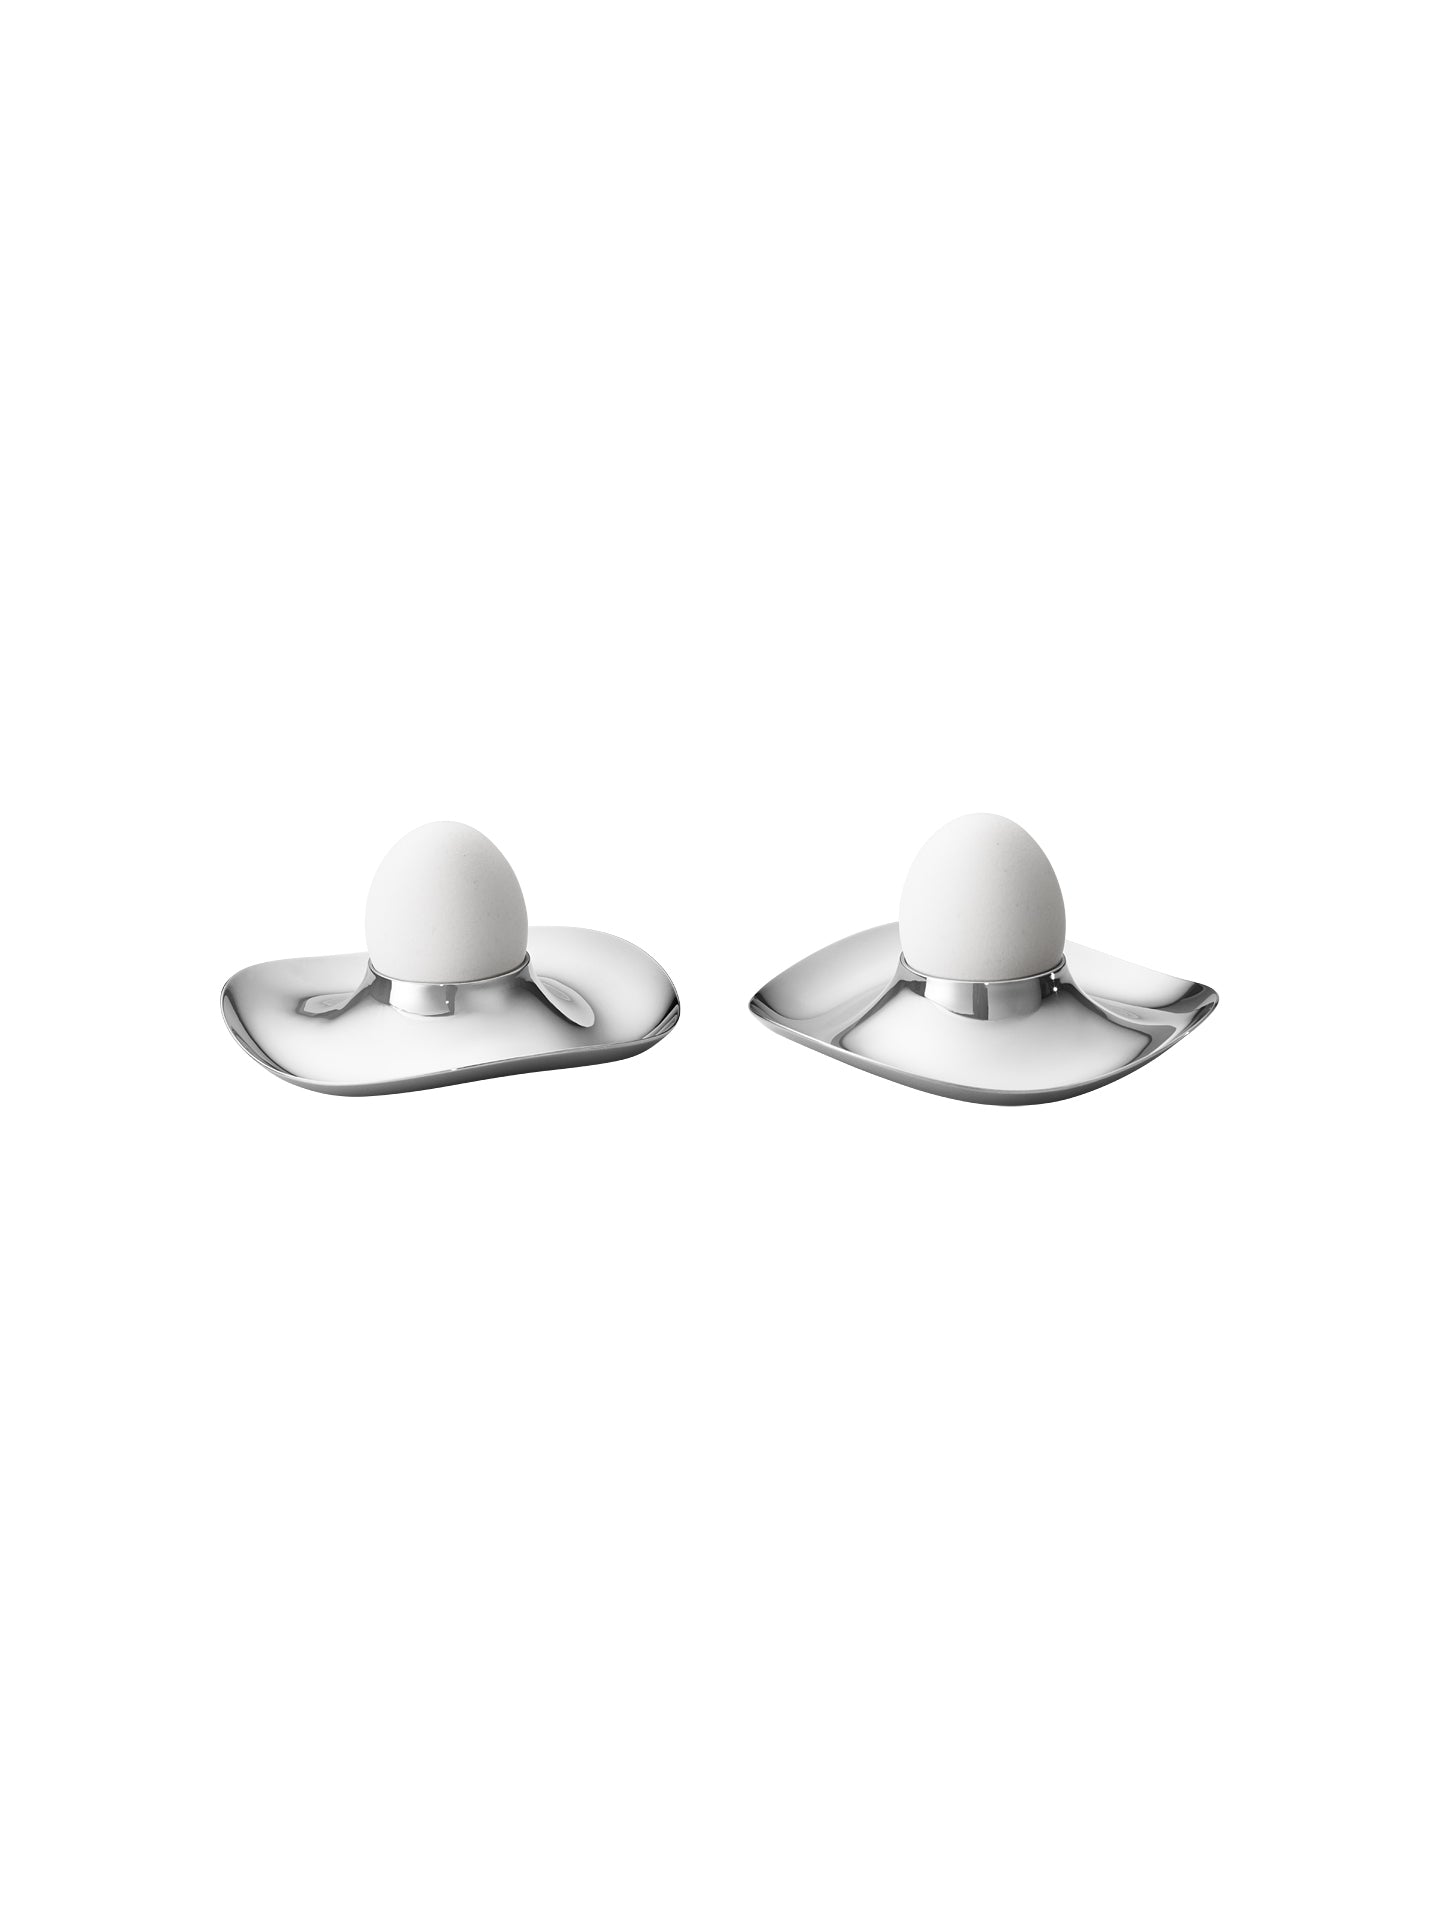 Design stainless steel egg cups (2 pieces)